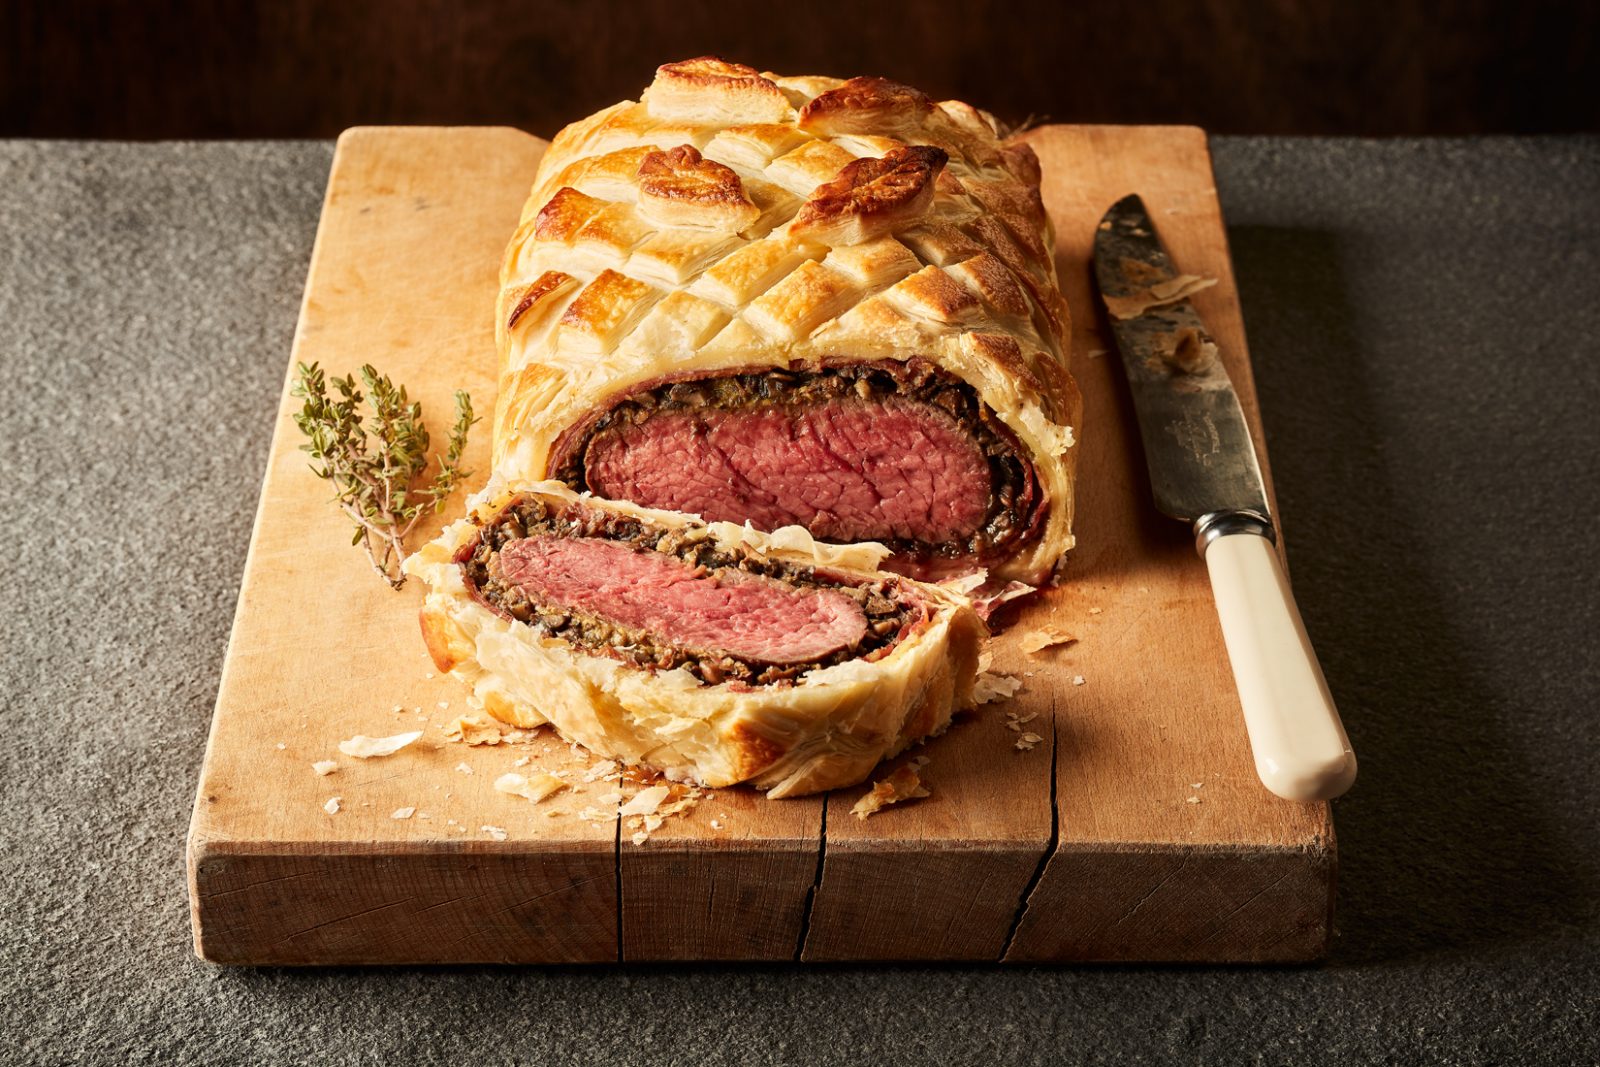 Welsh Beef Wellington with a Port &amp; Mushroom Sauce - Castell Howell